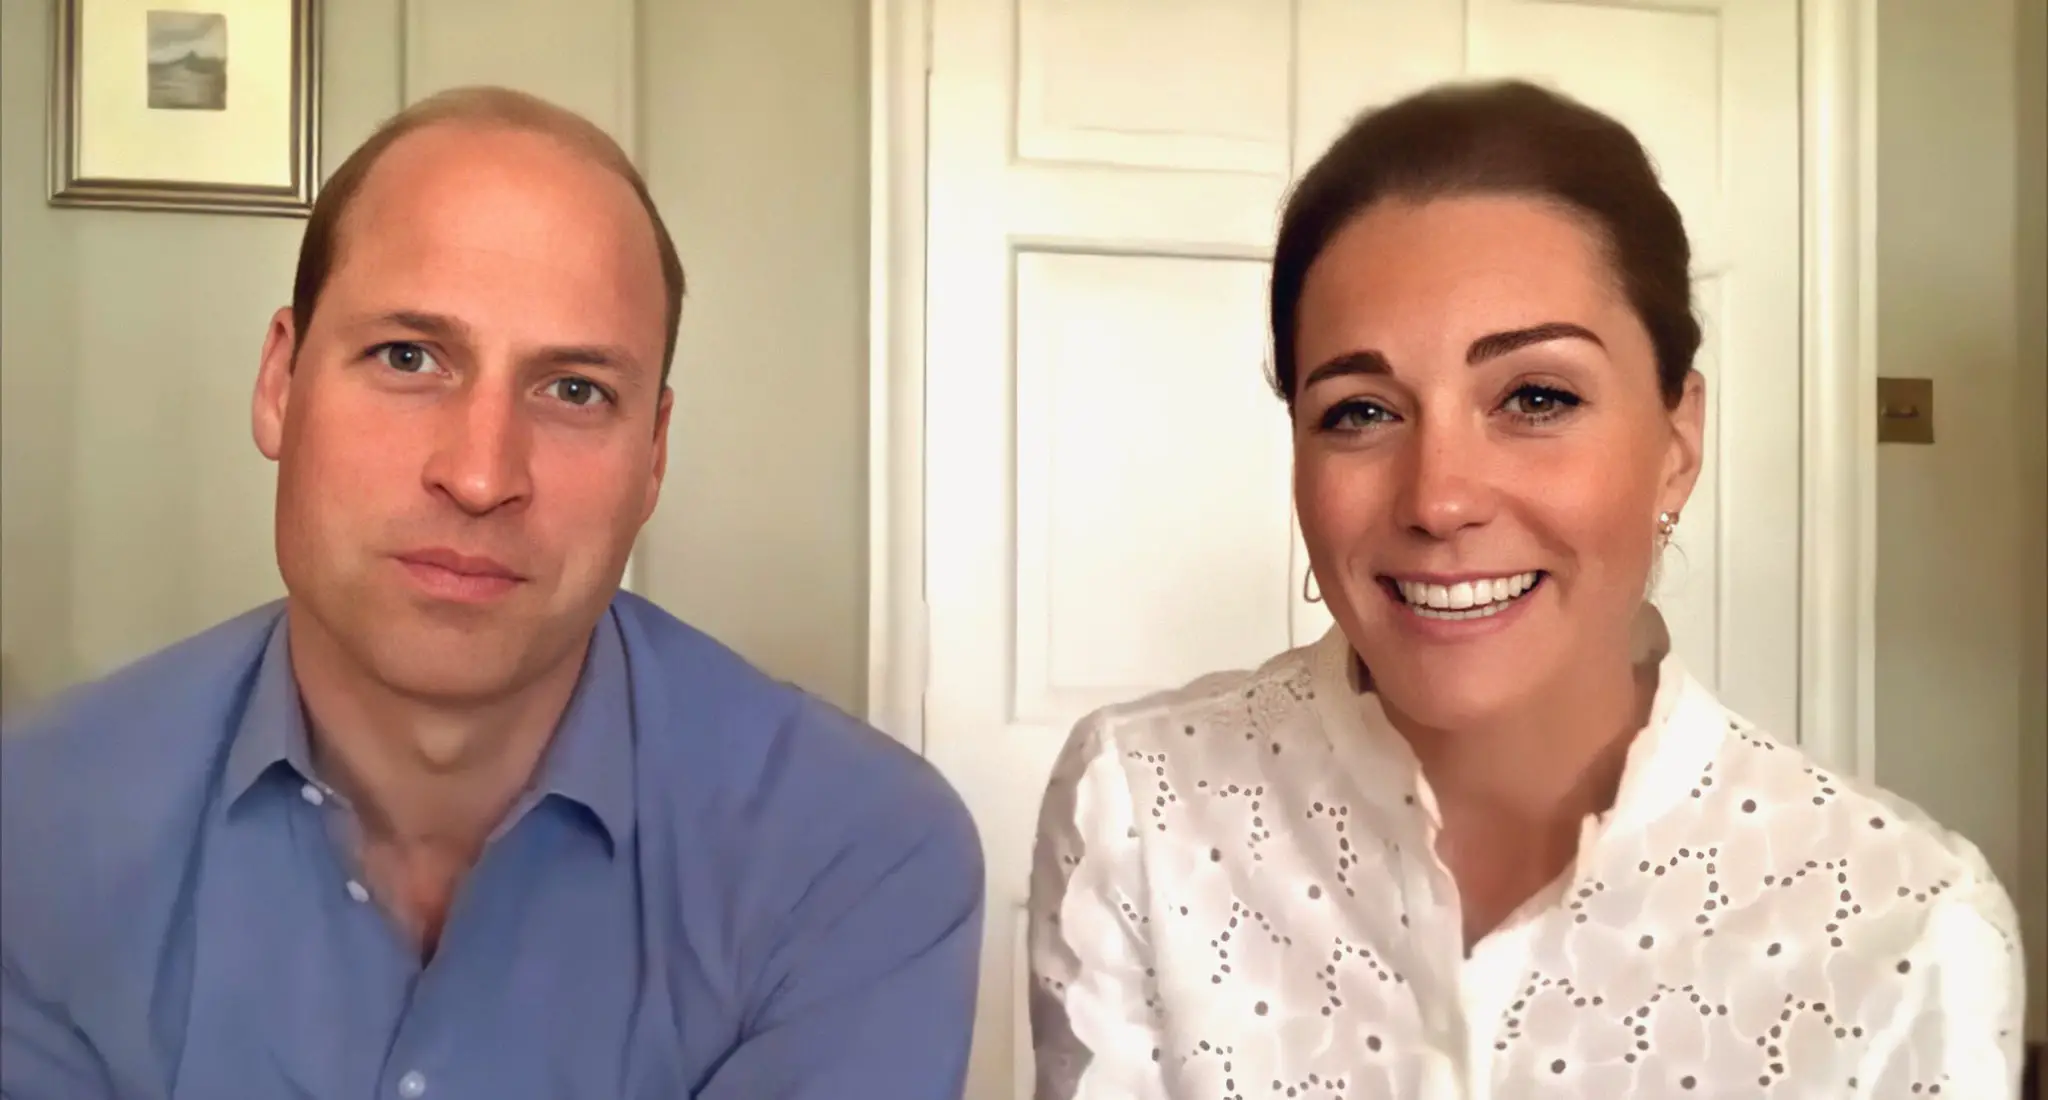 The Duke and Duchess of Cambridge marked the Volunteer Week